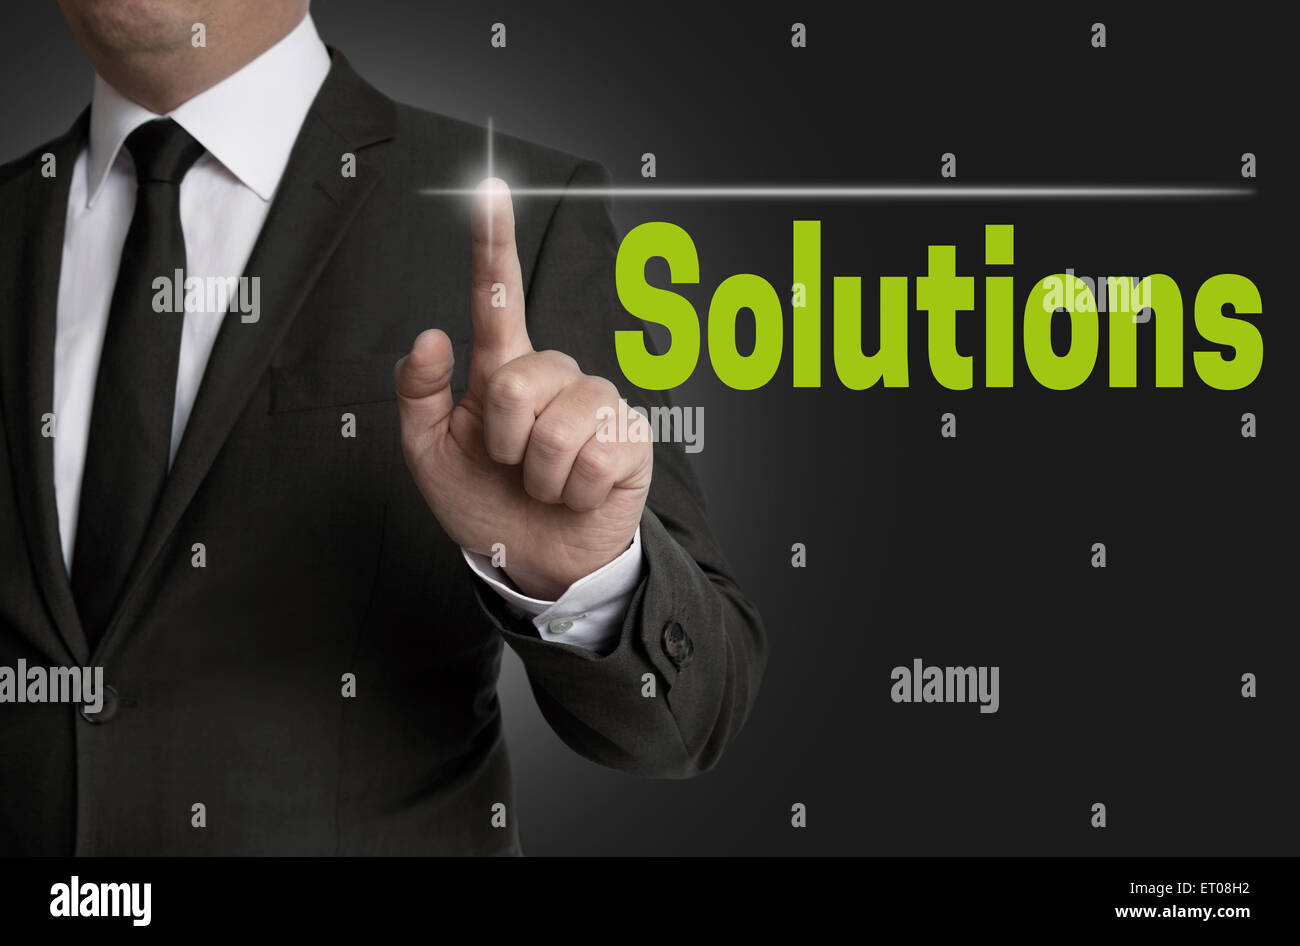 Solutions touchscreen is operated by businessman. Stock Photo